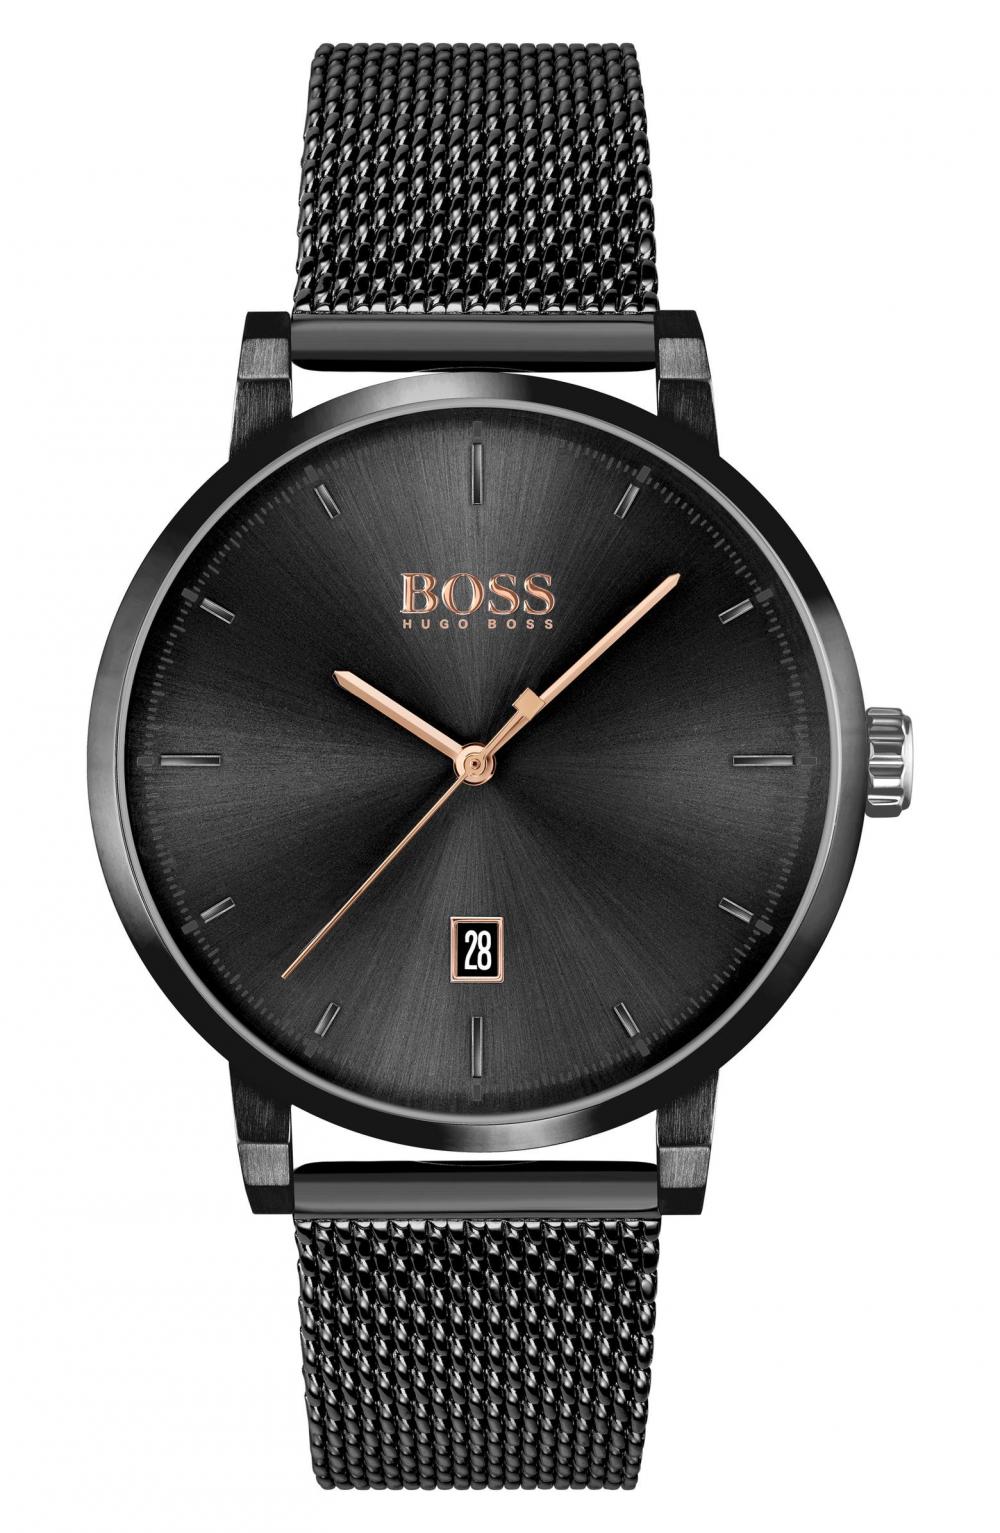 Watch. The best gift for a men